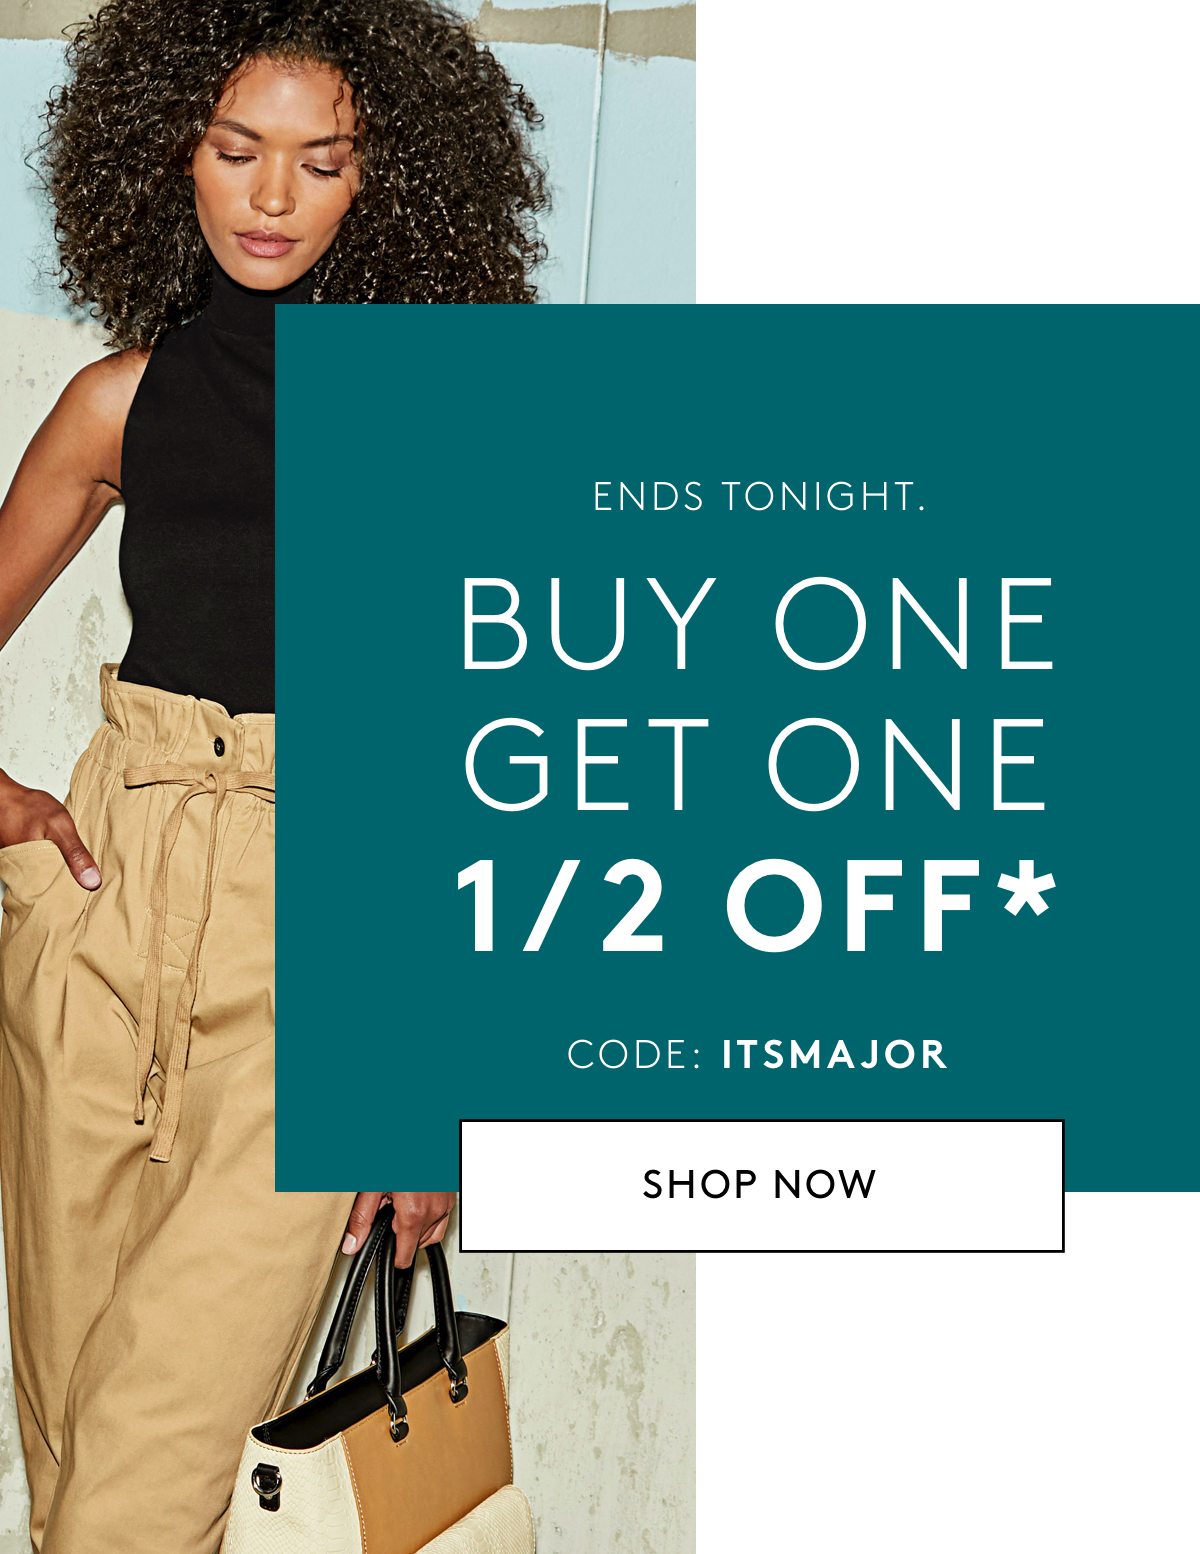 Ends tonight. Buy one Get one 1/2 off* code: ITSMAJOR Shop now